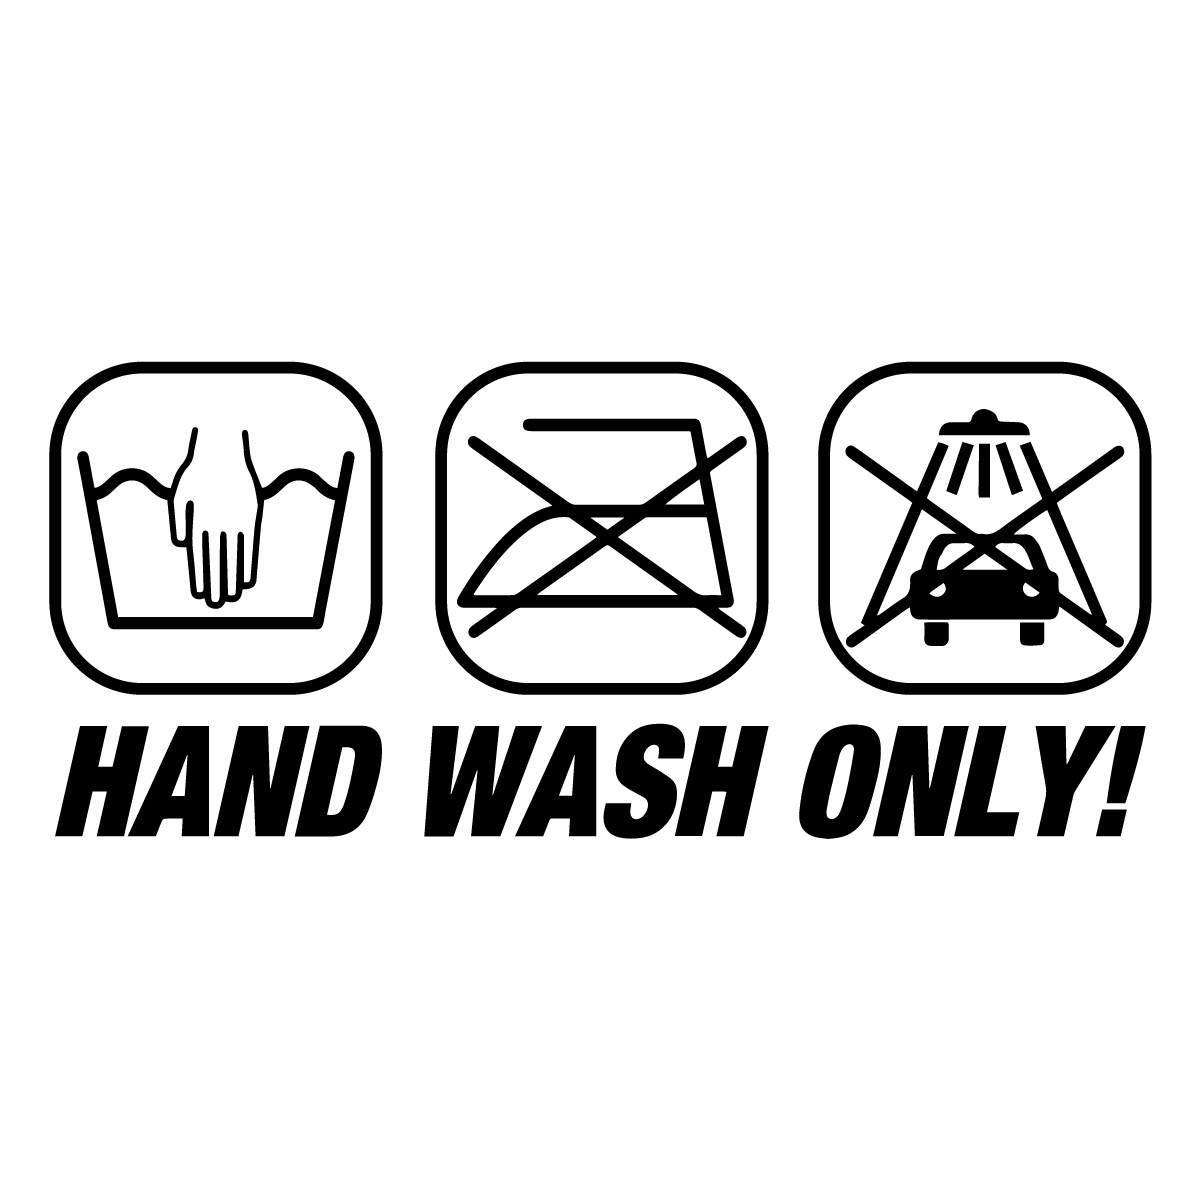 Hand wash only3 